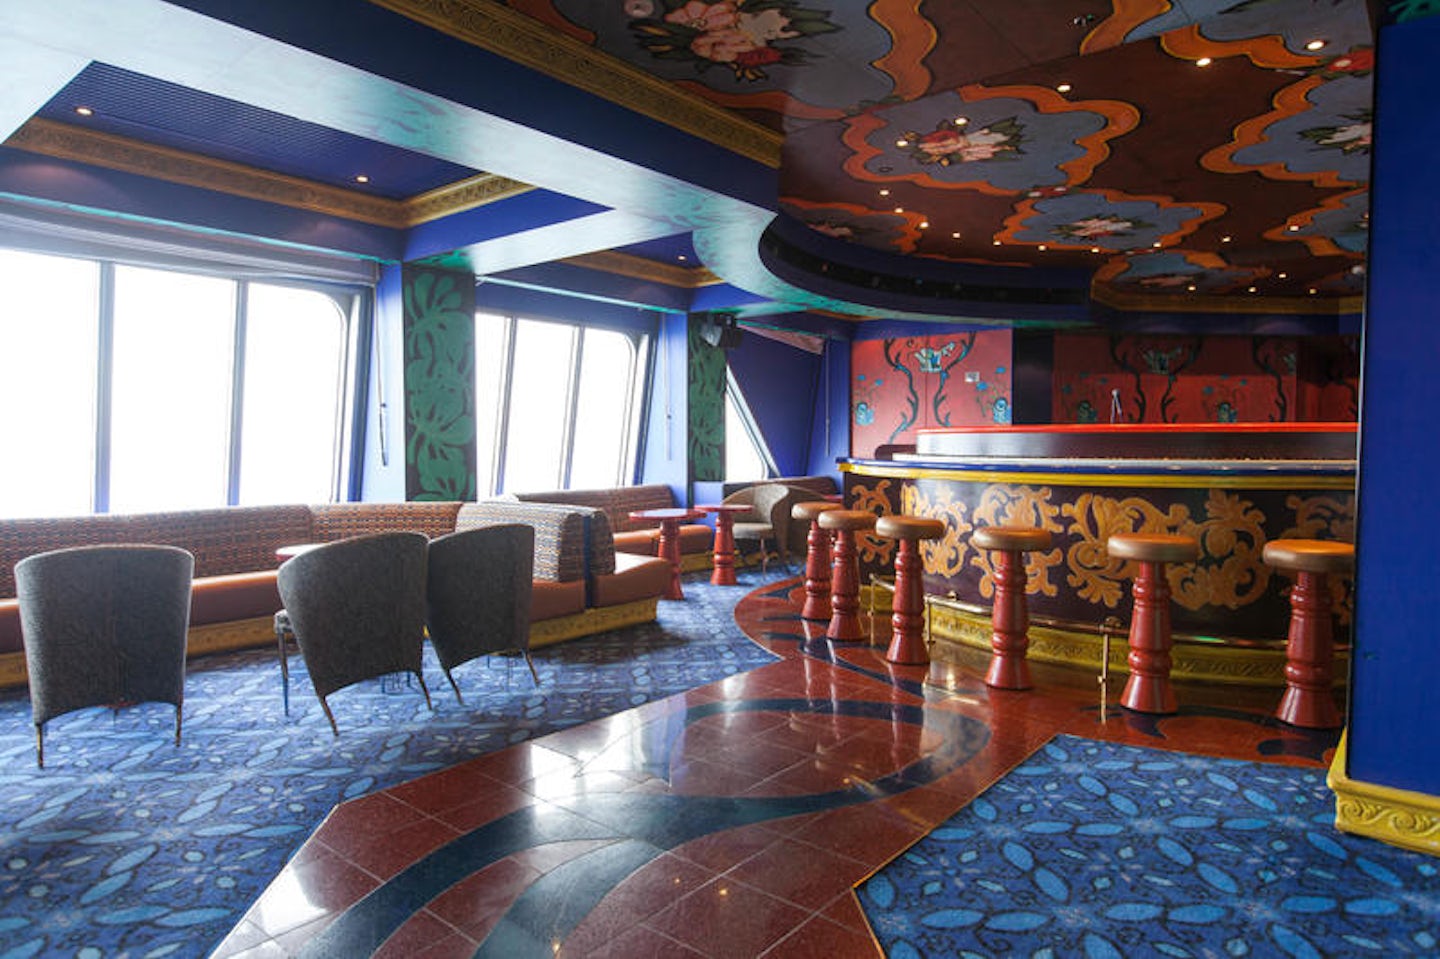 Blues Piano Bar on Carnival Conquest